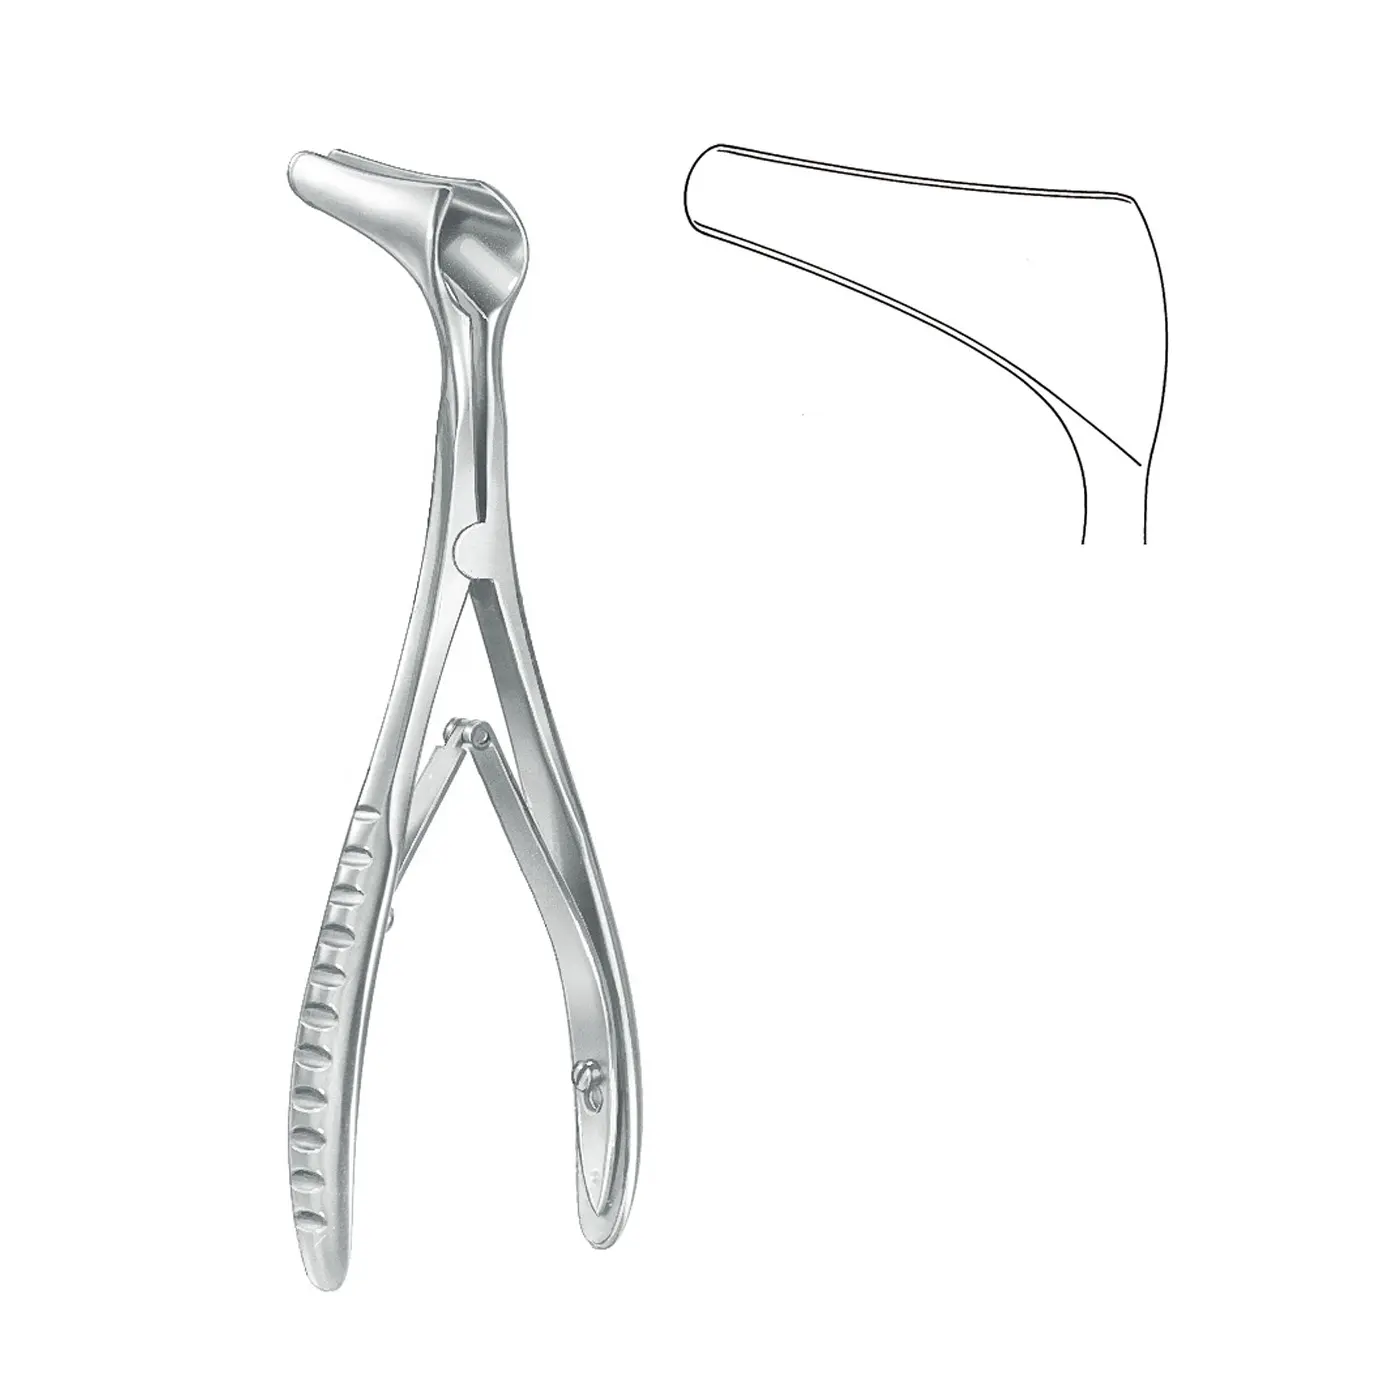 Vienna Nasal Speculum, Large ENT Instruments Surgical best Medical Grade Stainless Steel Products BY SIGAL MEDCO